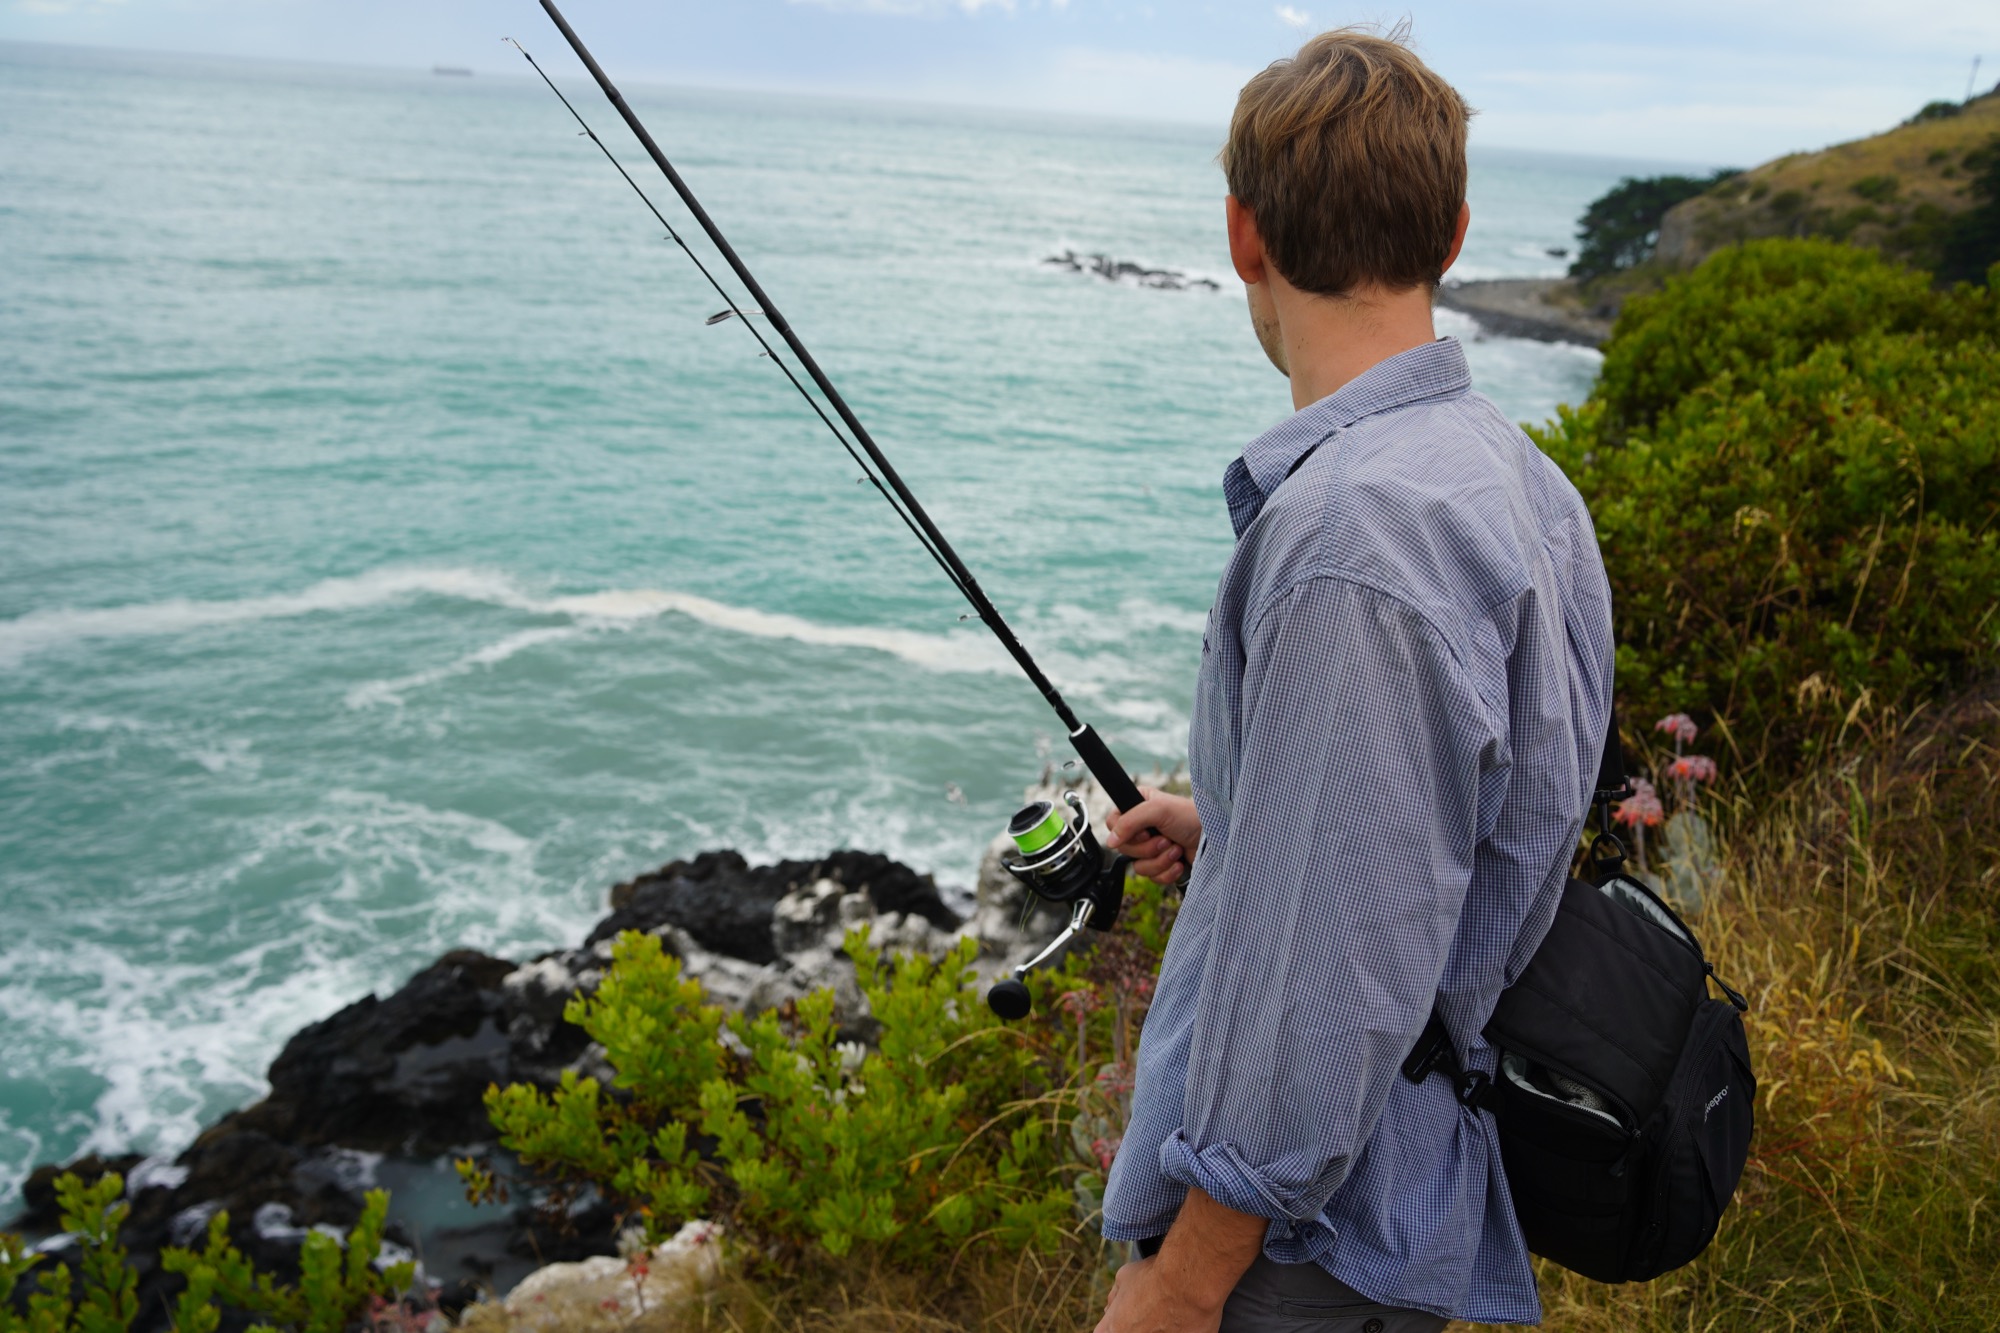 A Collapsible Fishing Rod in Your Travel Baggage - Worth The Space?